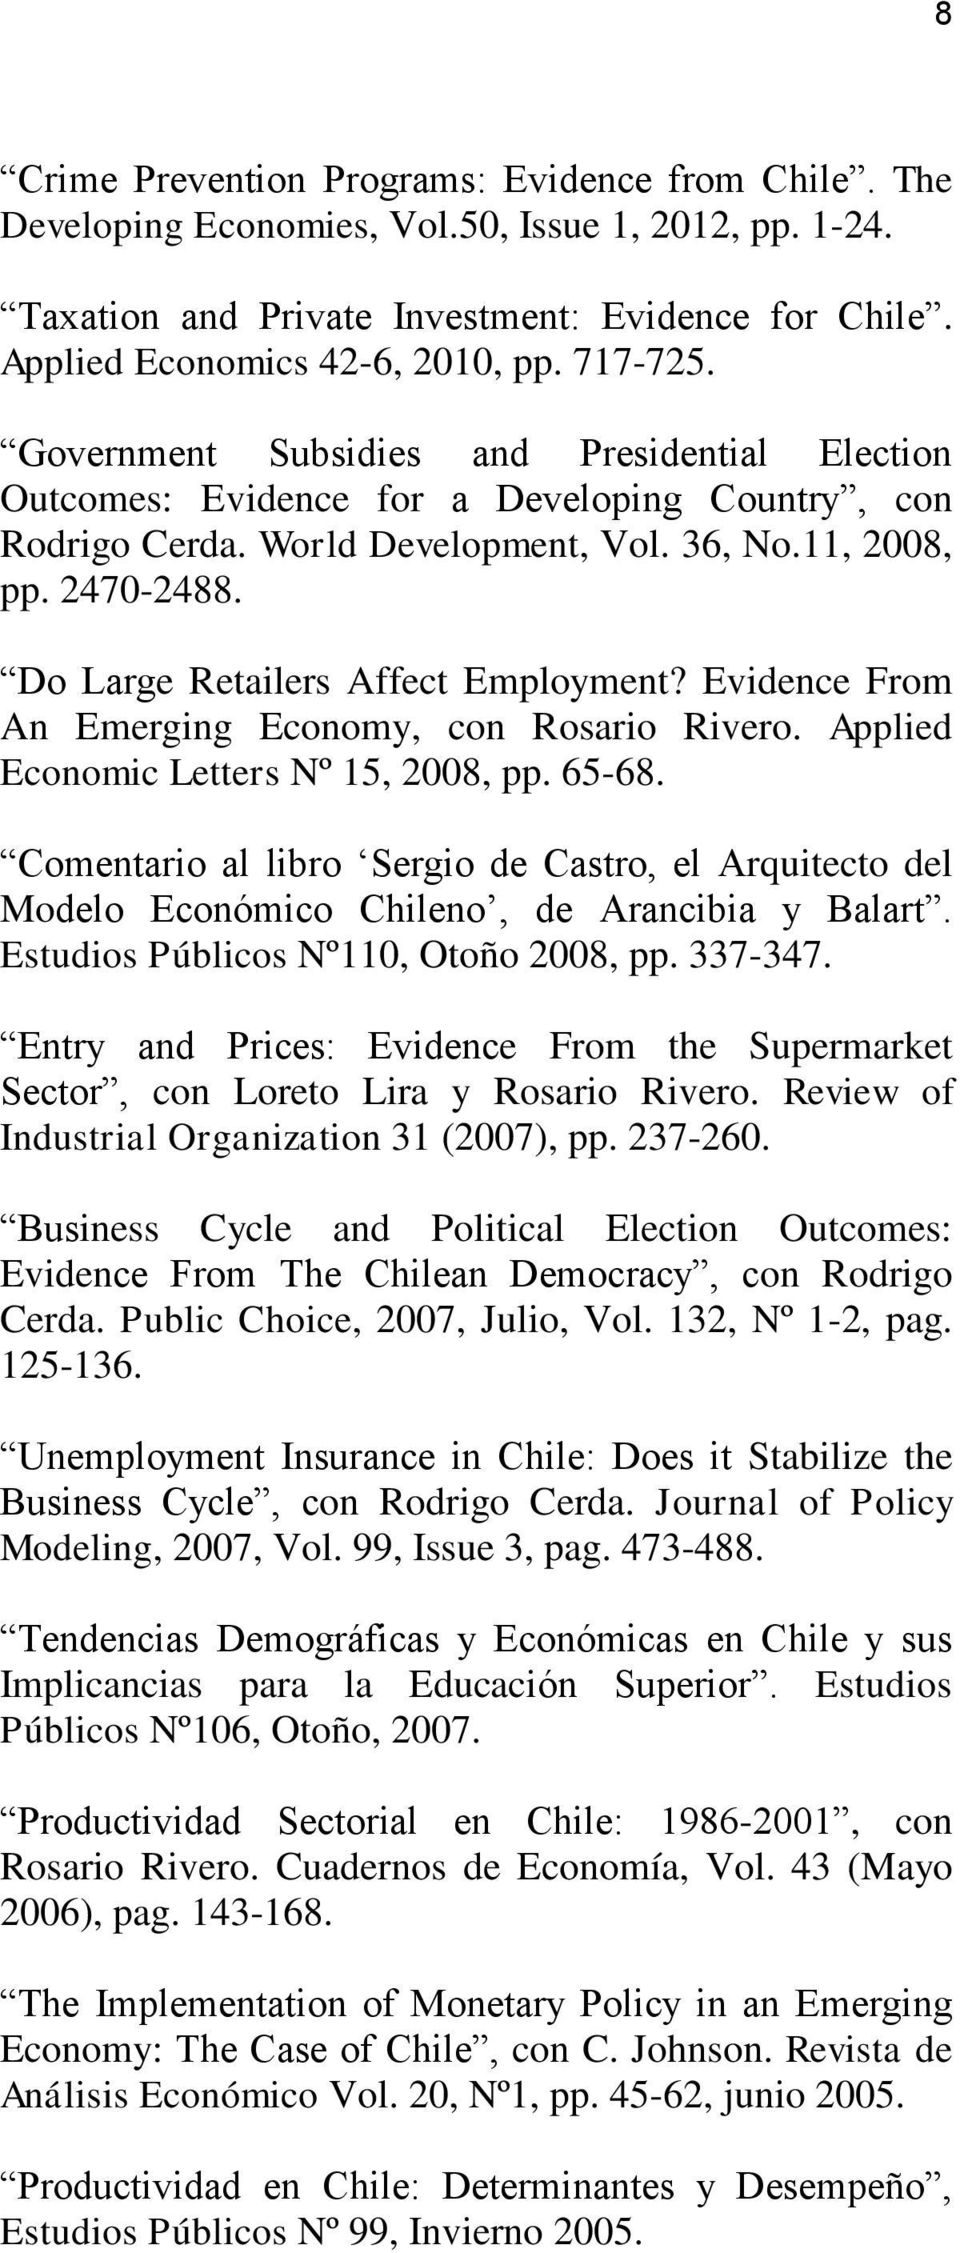 Do Large Retailers Affect Employment? Evidence From An Emerging Economy, con Rosario Rivero. Applied Economic Letters Nº 15, 2008, pp. 65-68.